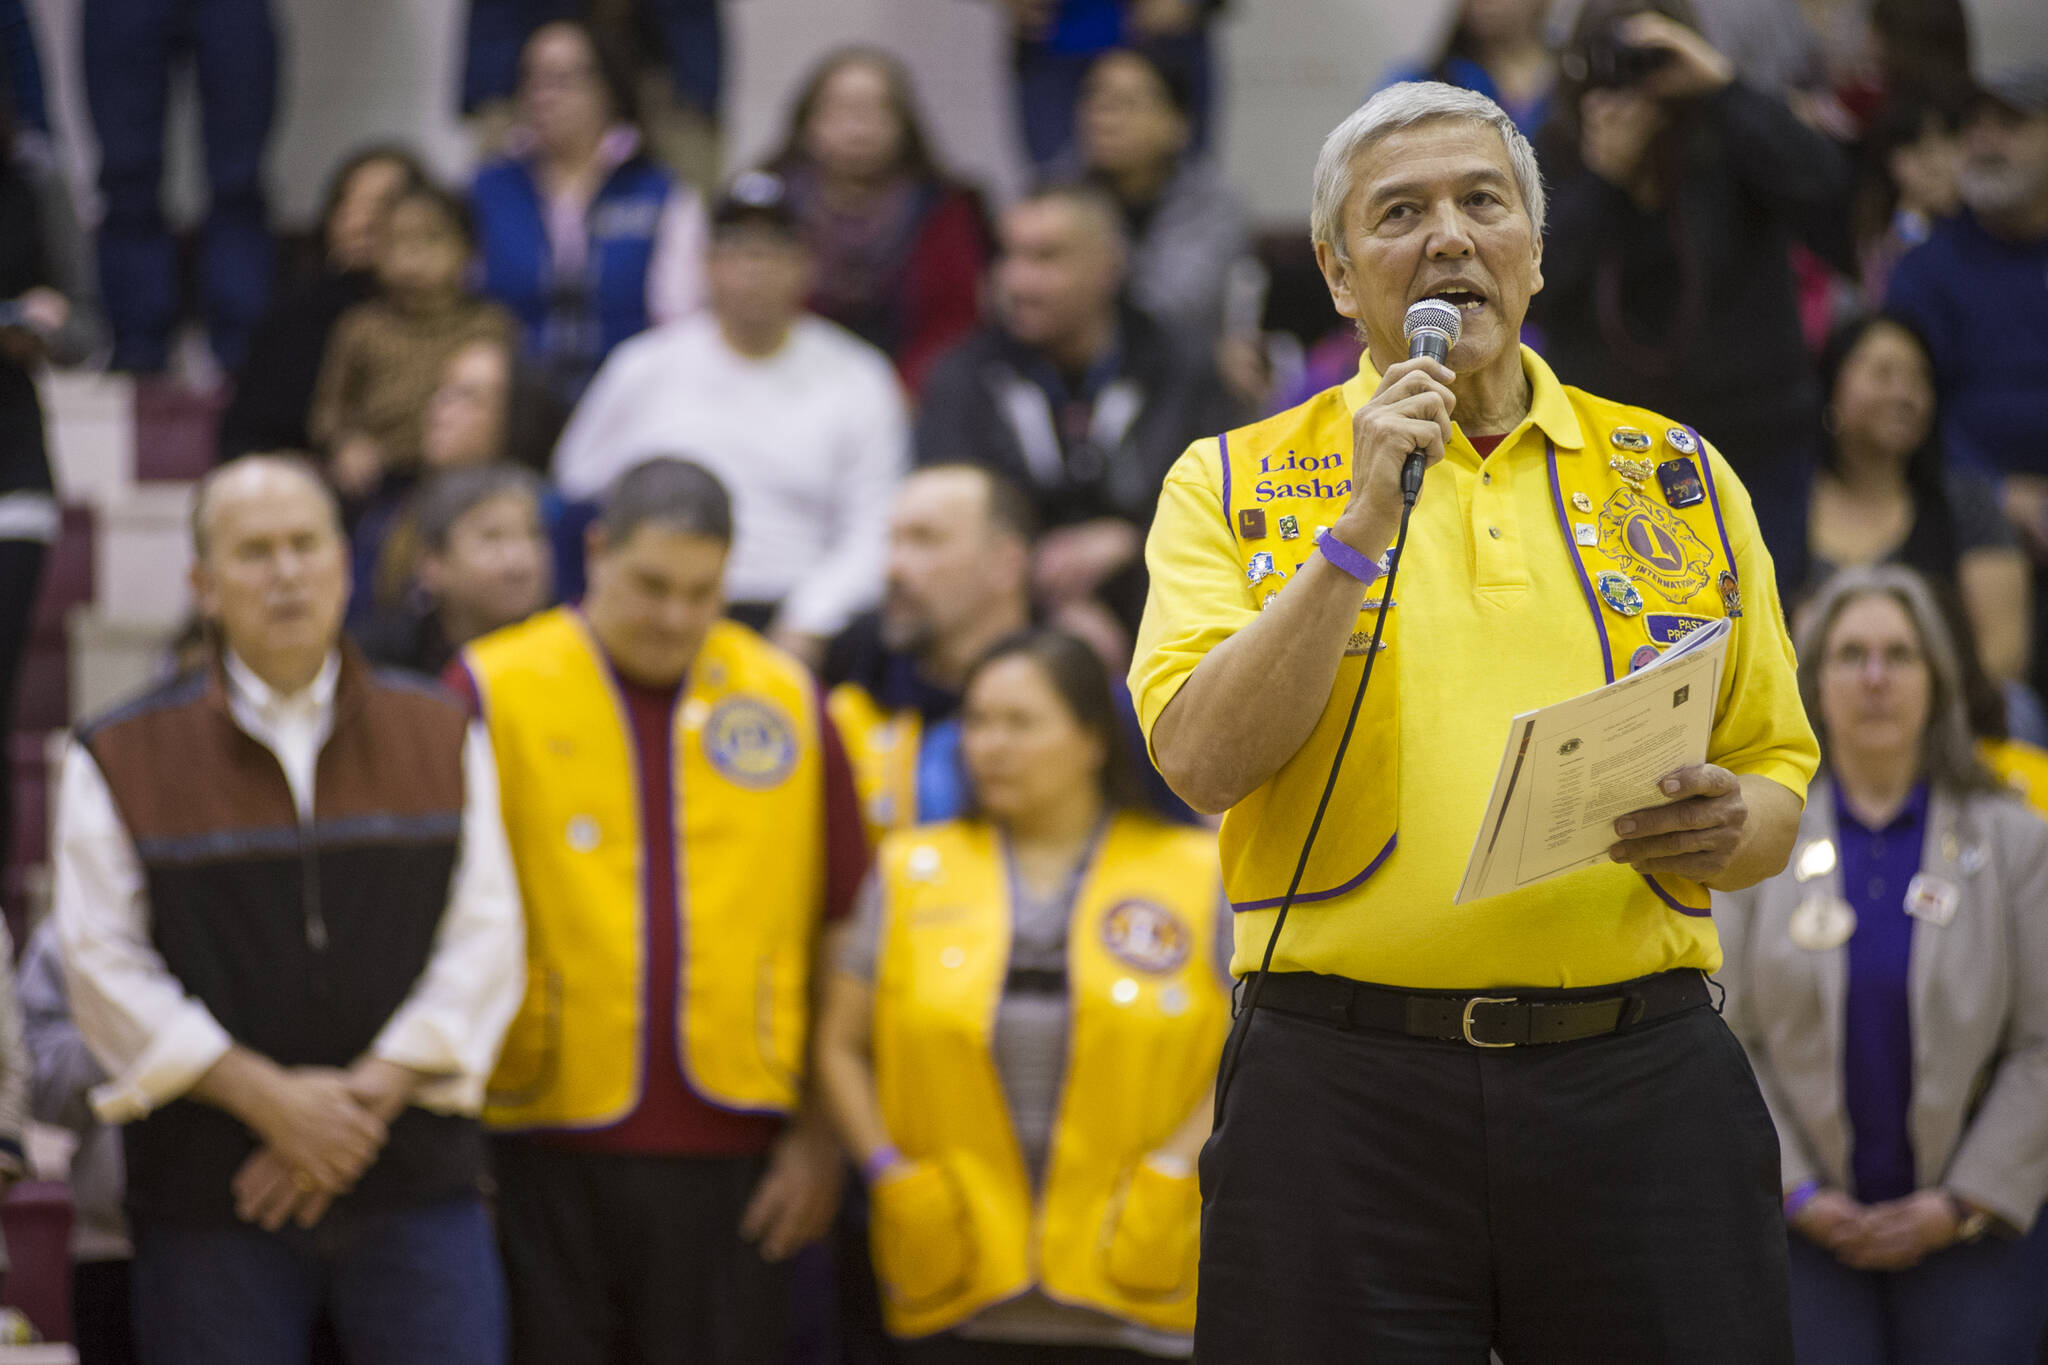 In this March 16, 2015 photo, Sasha Soboleff, past president of the Juneau Lions Club, introduces then-Gov. Bill Walker, left, during opening ceremonies of the Juneau Lions Club Gold Medal Basketball Tournament. (Michael Penn / Juneau Empire File)